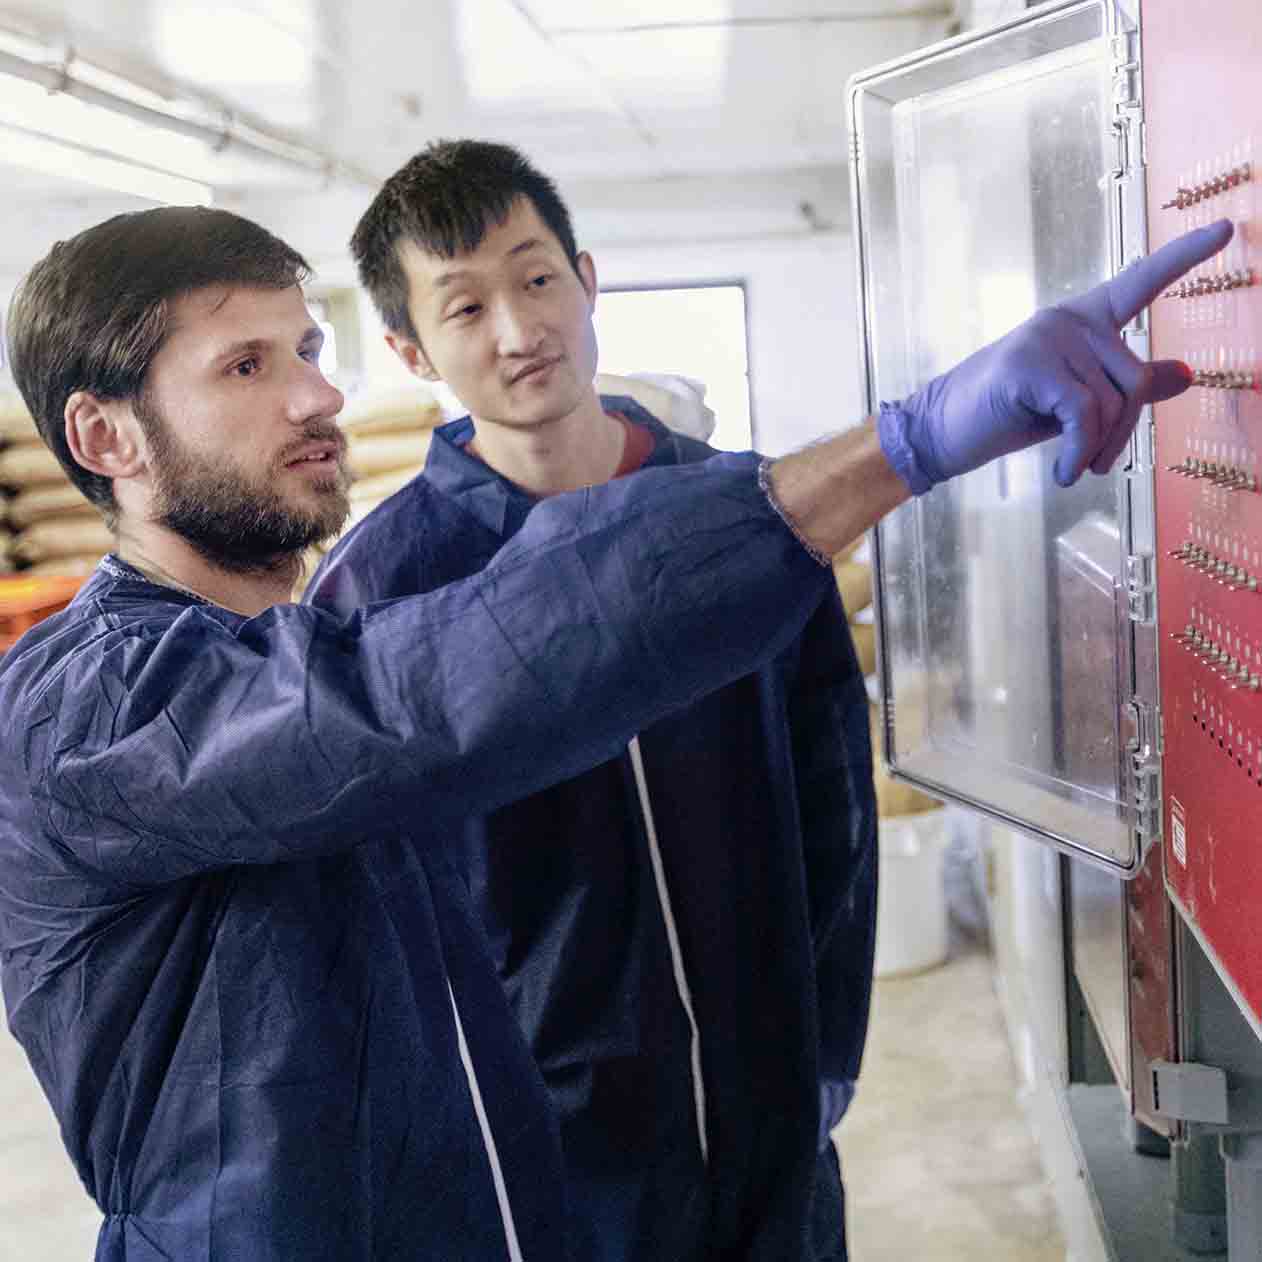 A free precision poultry farming conference will be held virtually on May 4, 2021, coordinated by Lilong Chai, an assistant professor and engineering specialist in the UGA College of Agricultural and Environmental Sciences.